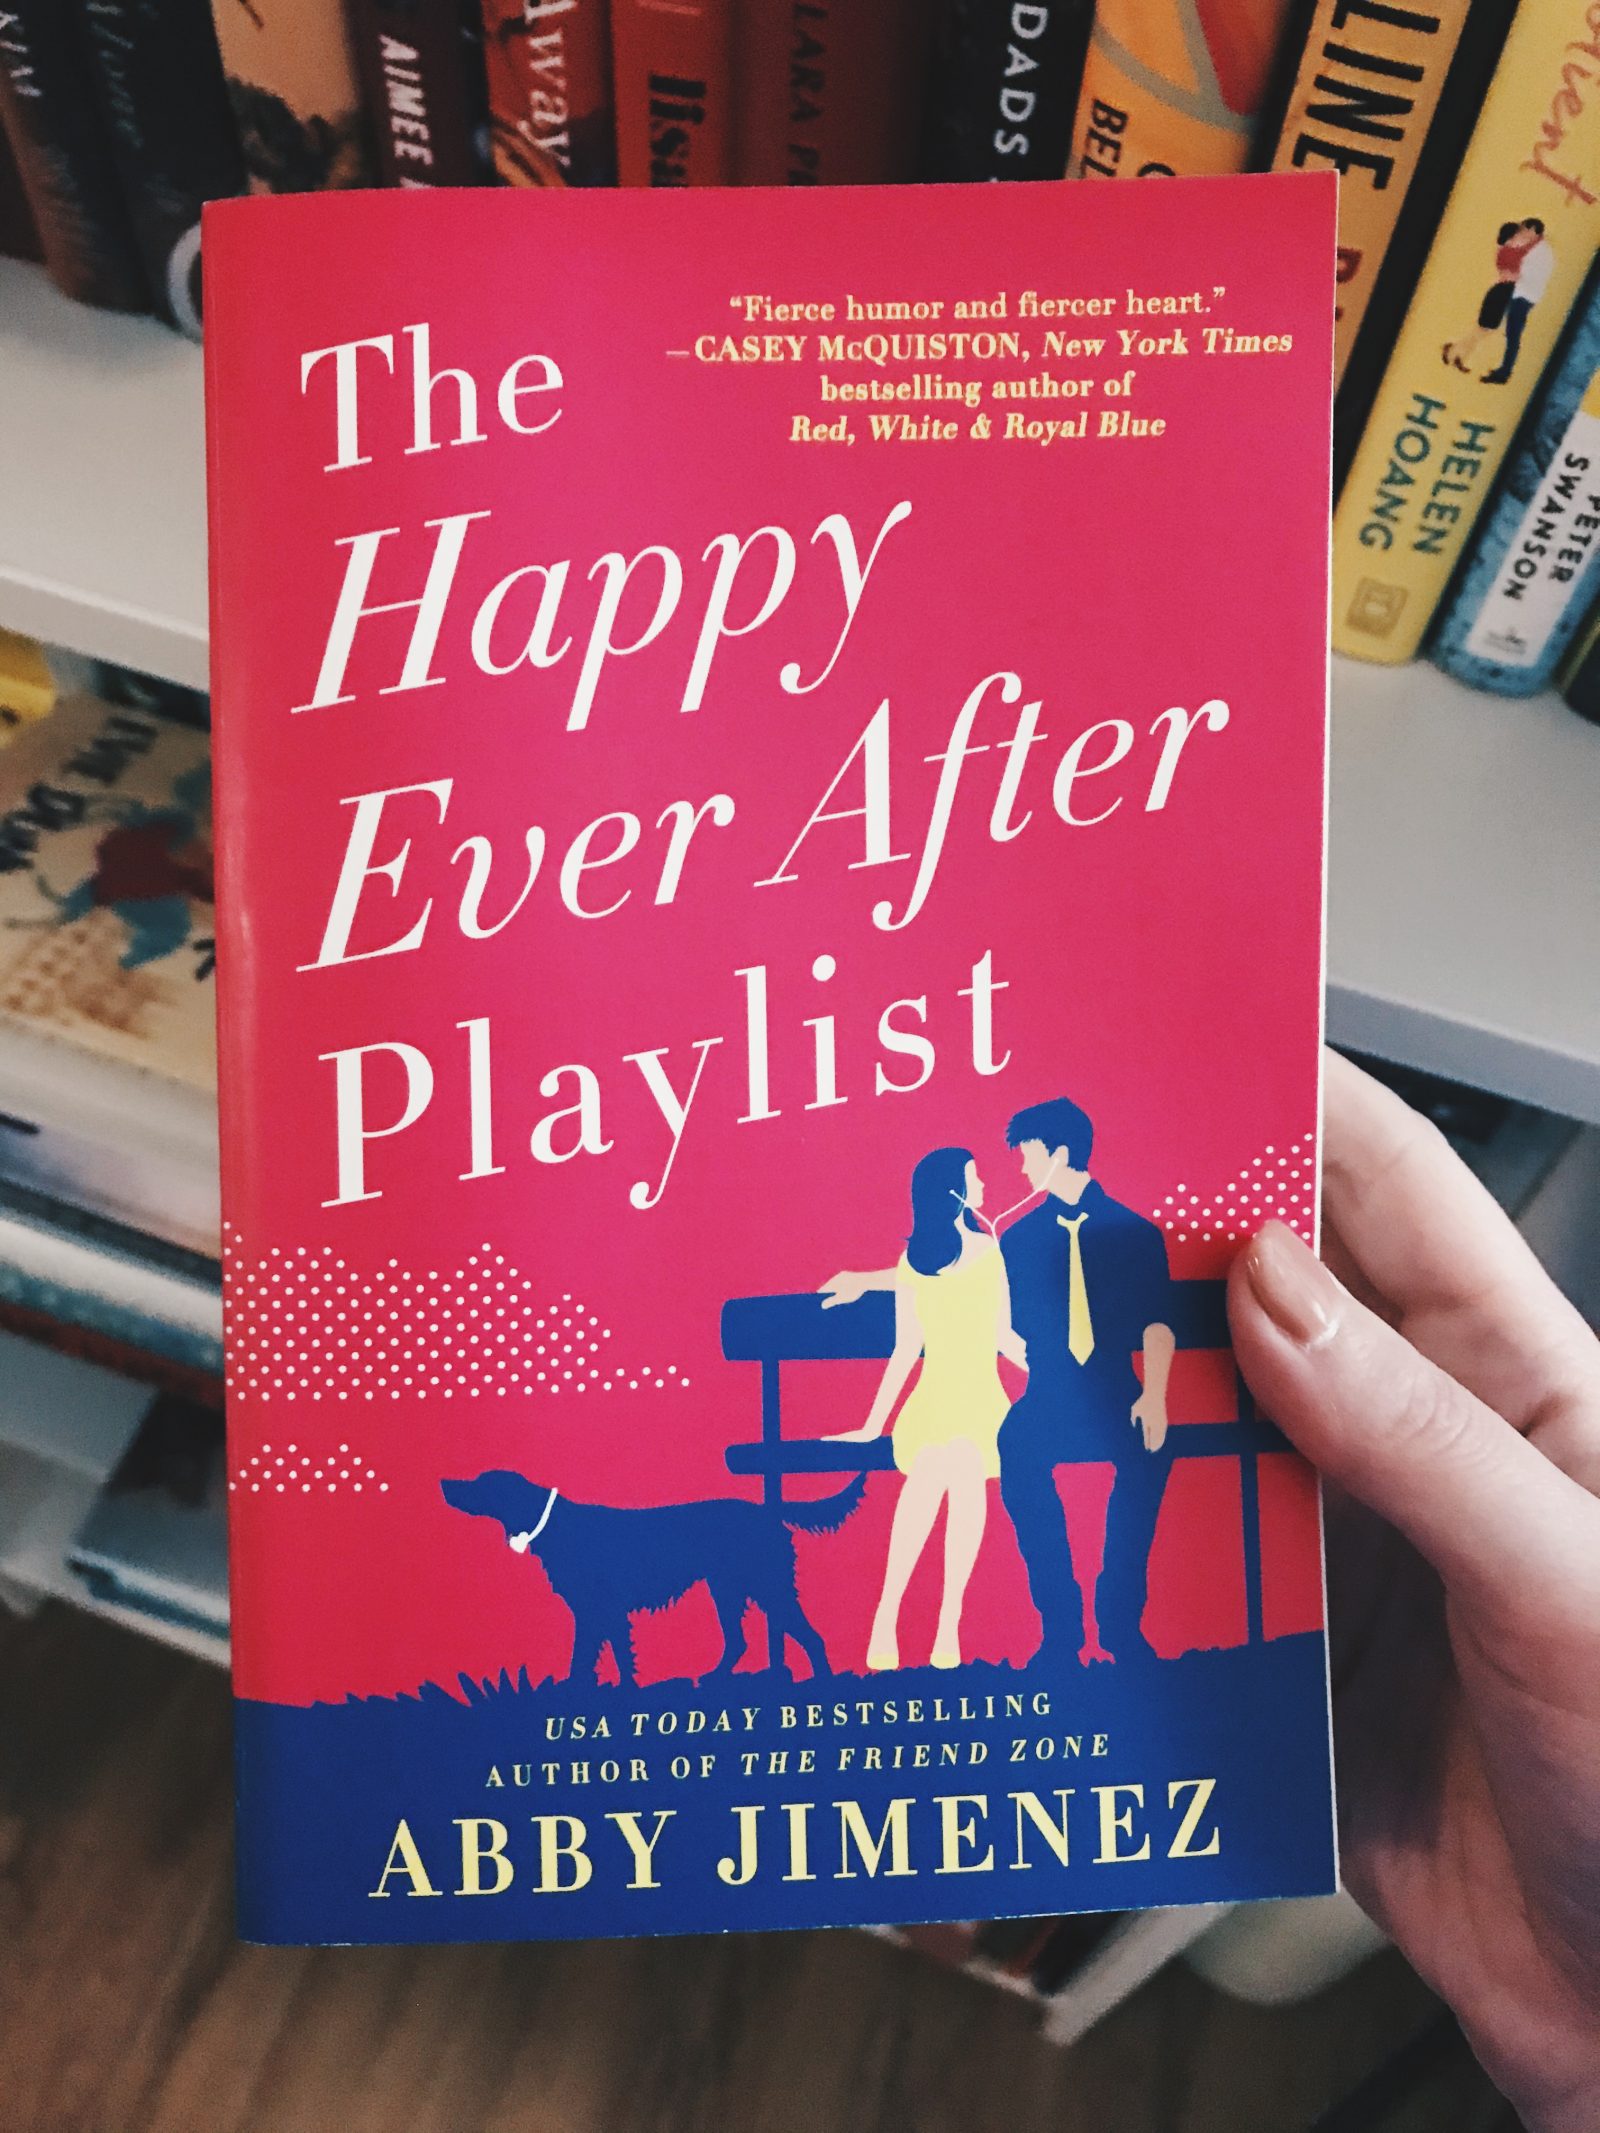 the happy ever after playlist